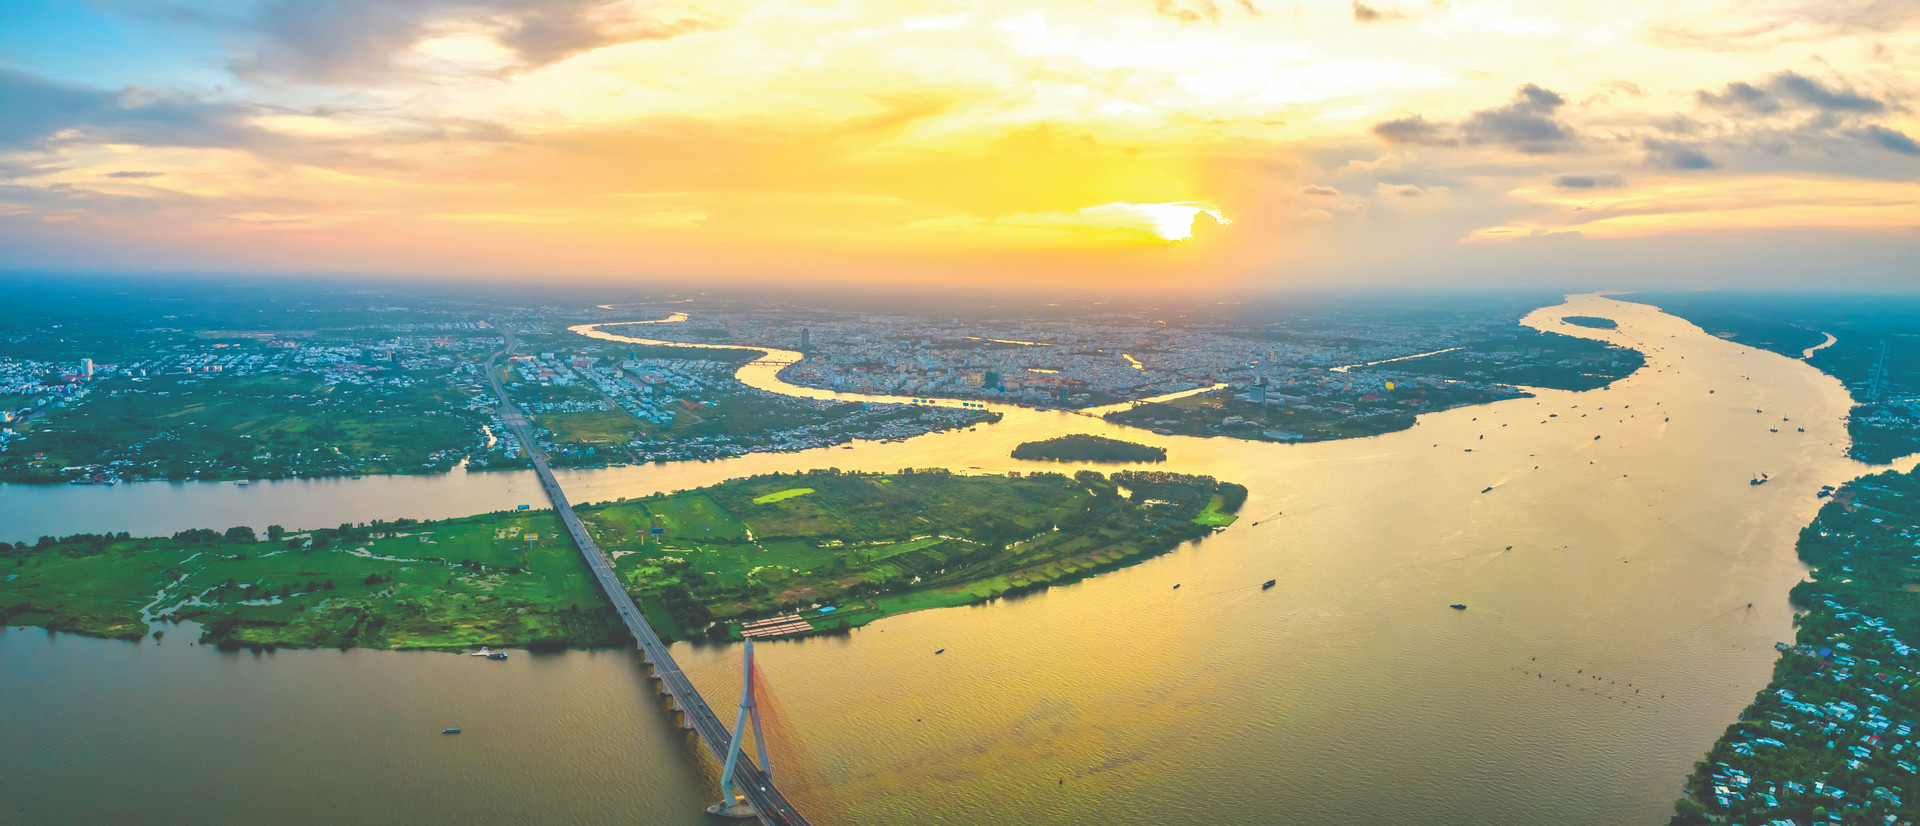 can-tho-bridge-can-tho-city-vietnam-aerial-view-sunset-sky-can-tho-bridge-is-famous-bridge-me-compressed.jpg